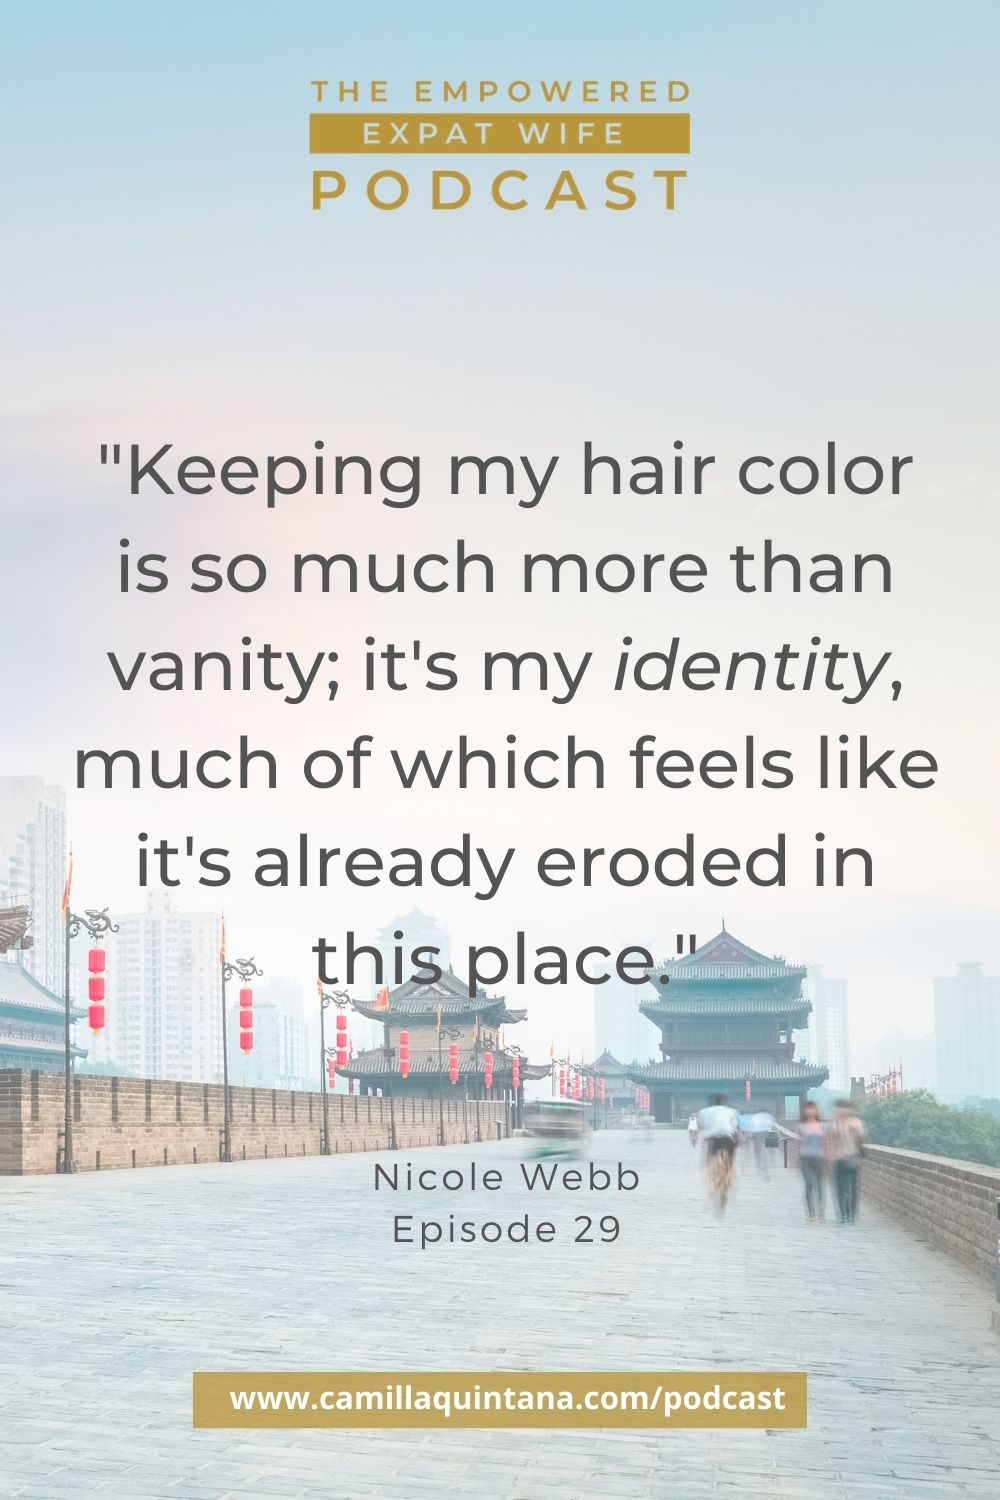 Nicole Webb, the empowered expat wife podcast